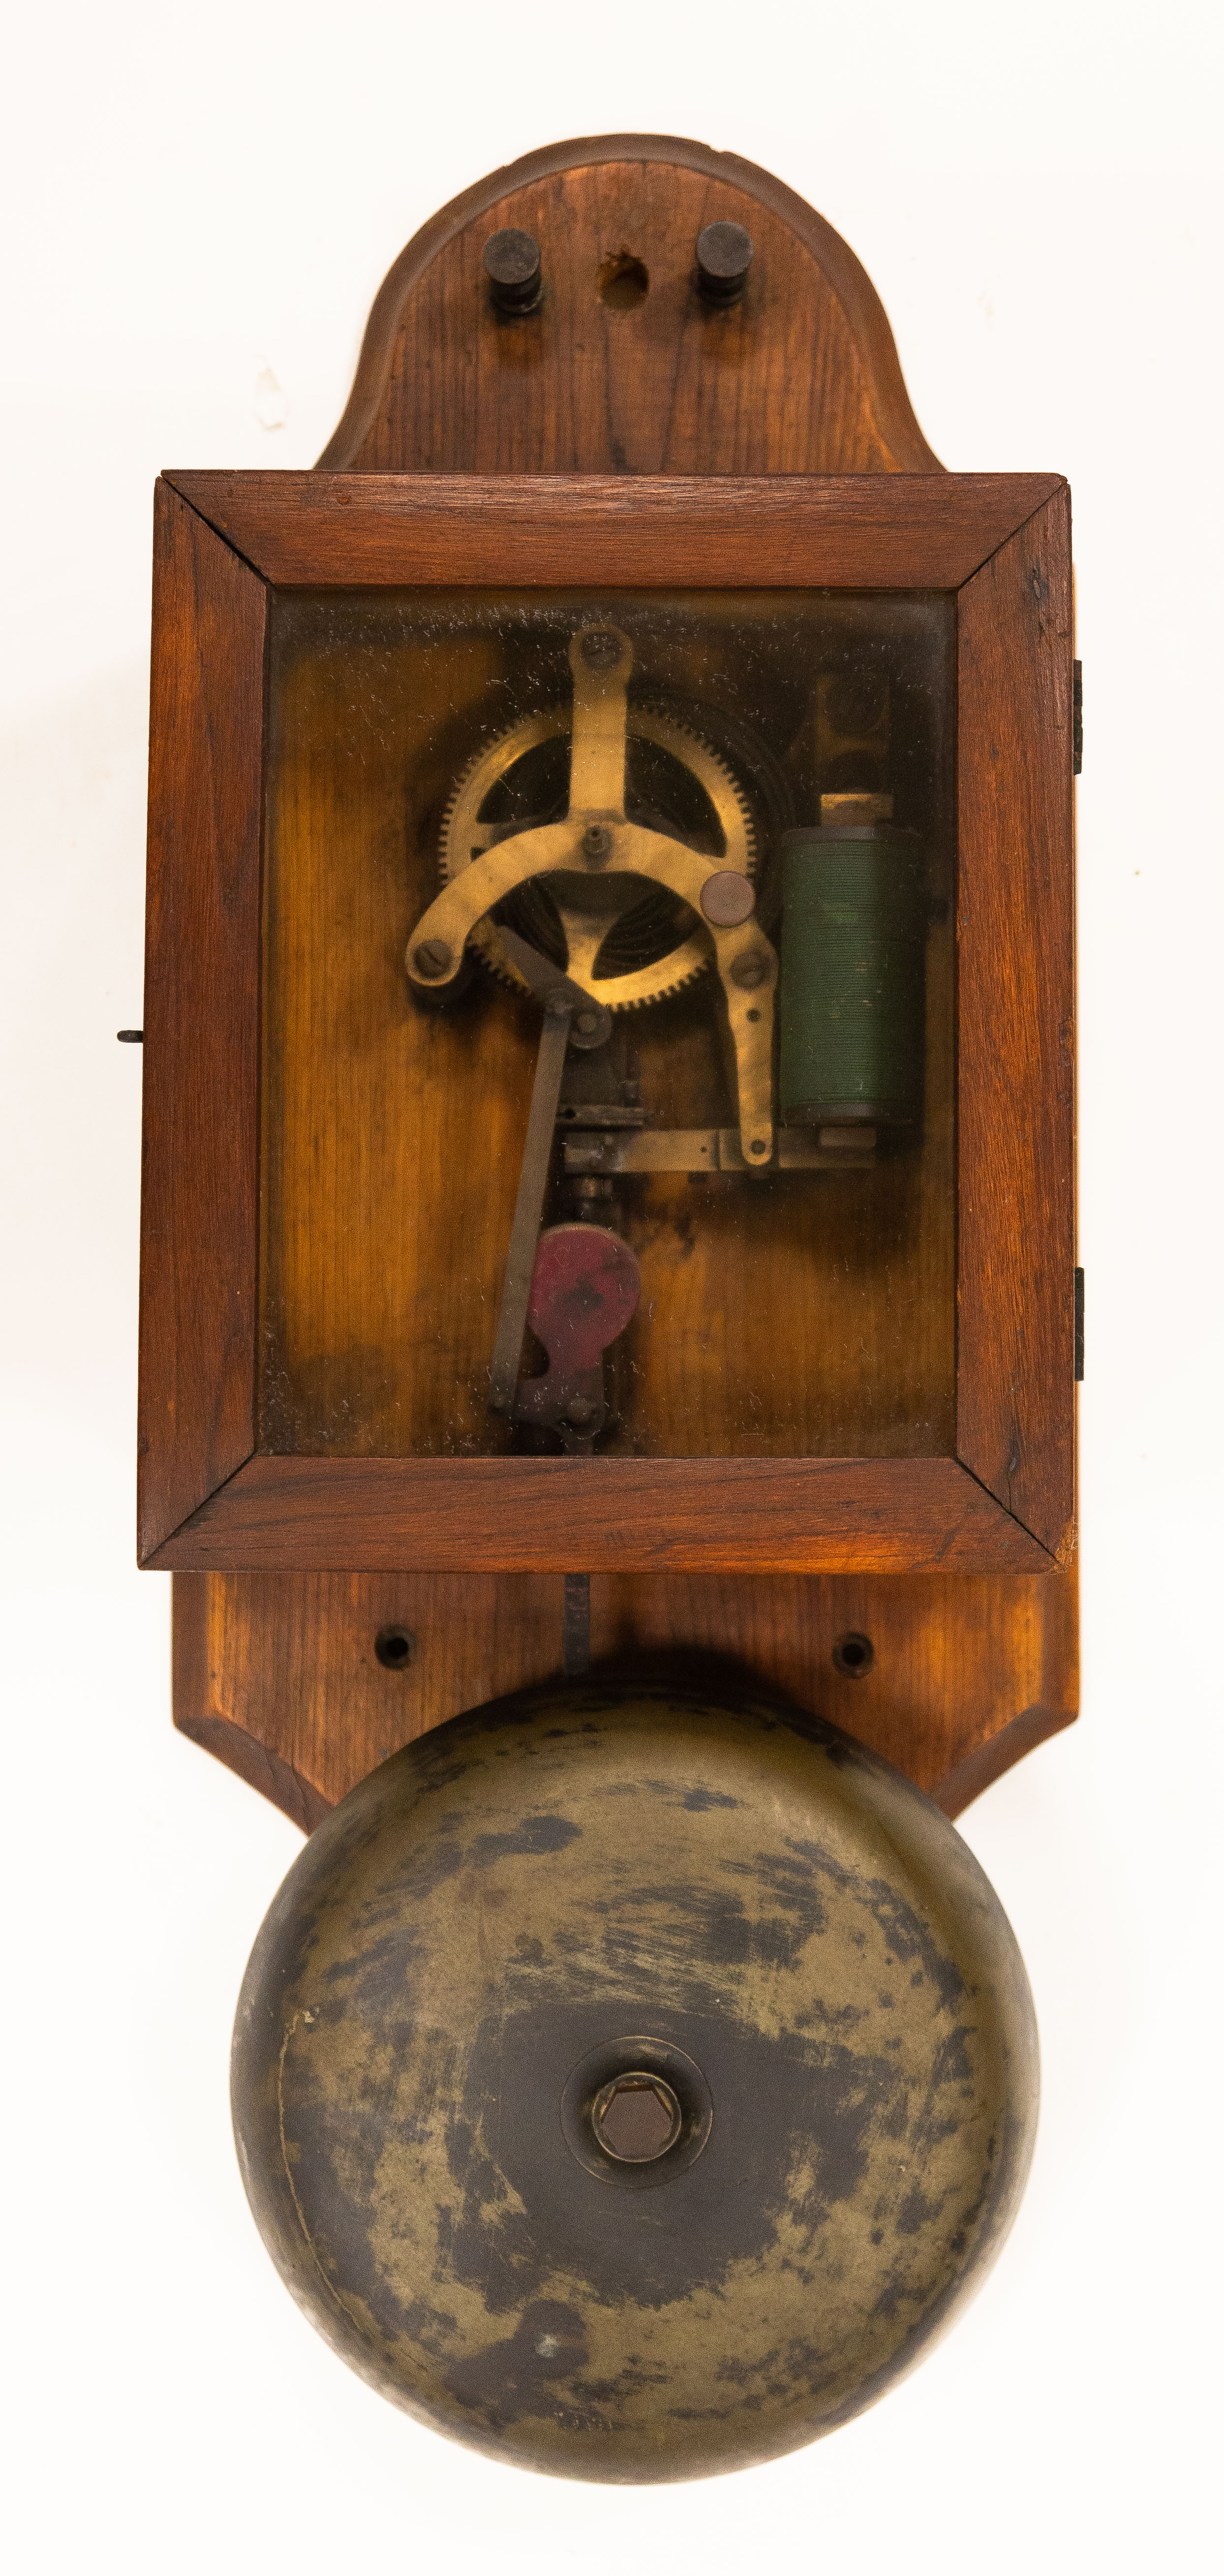 UNMARKED FIRE BELL Wood case with 3c84e3